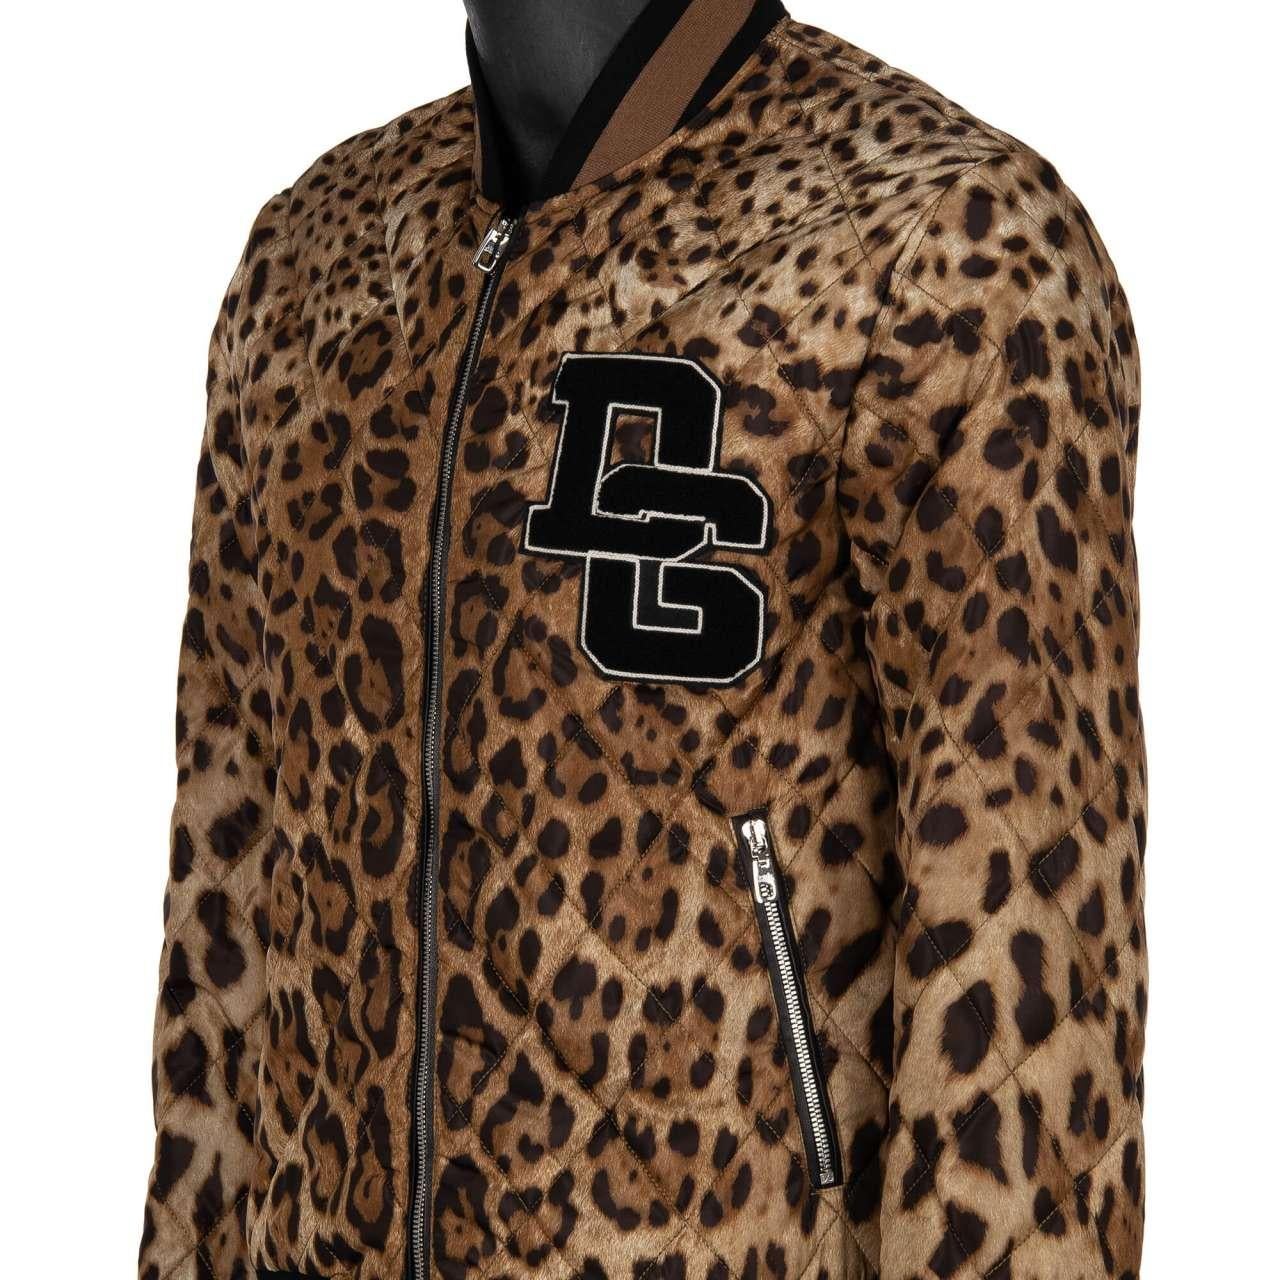 D&G Quilted Leopard Printed Nylon Bomber Jacket with DG Logo Brown Black 50 In Excellent Condition For Sale In Erkrath, DE